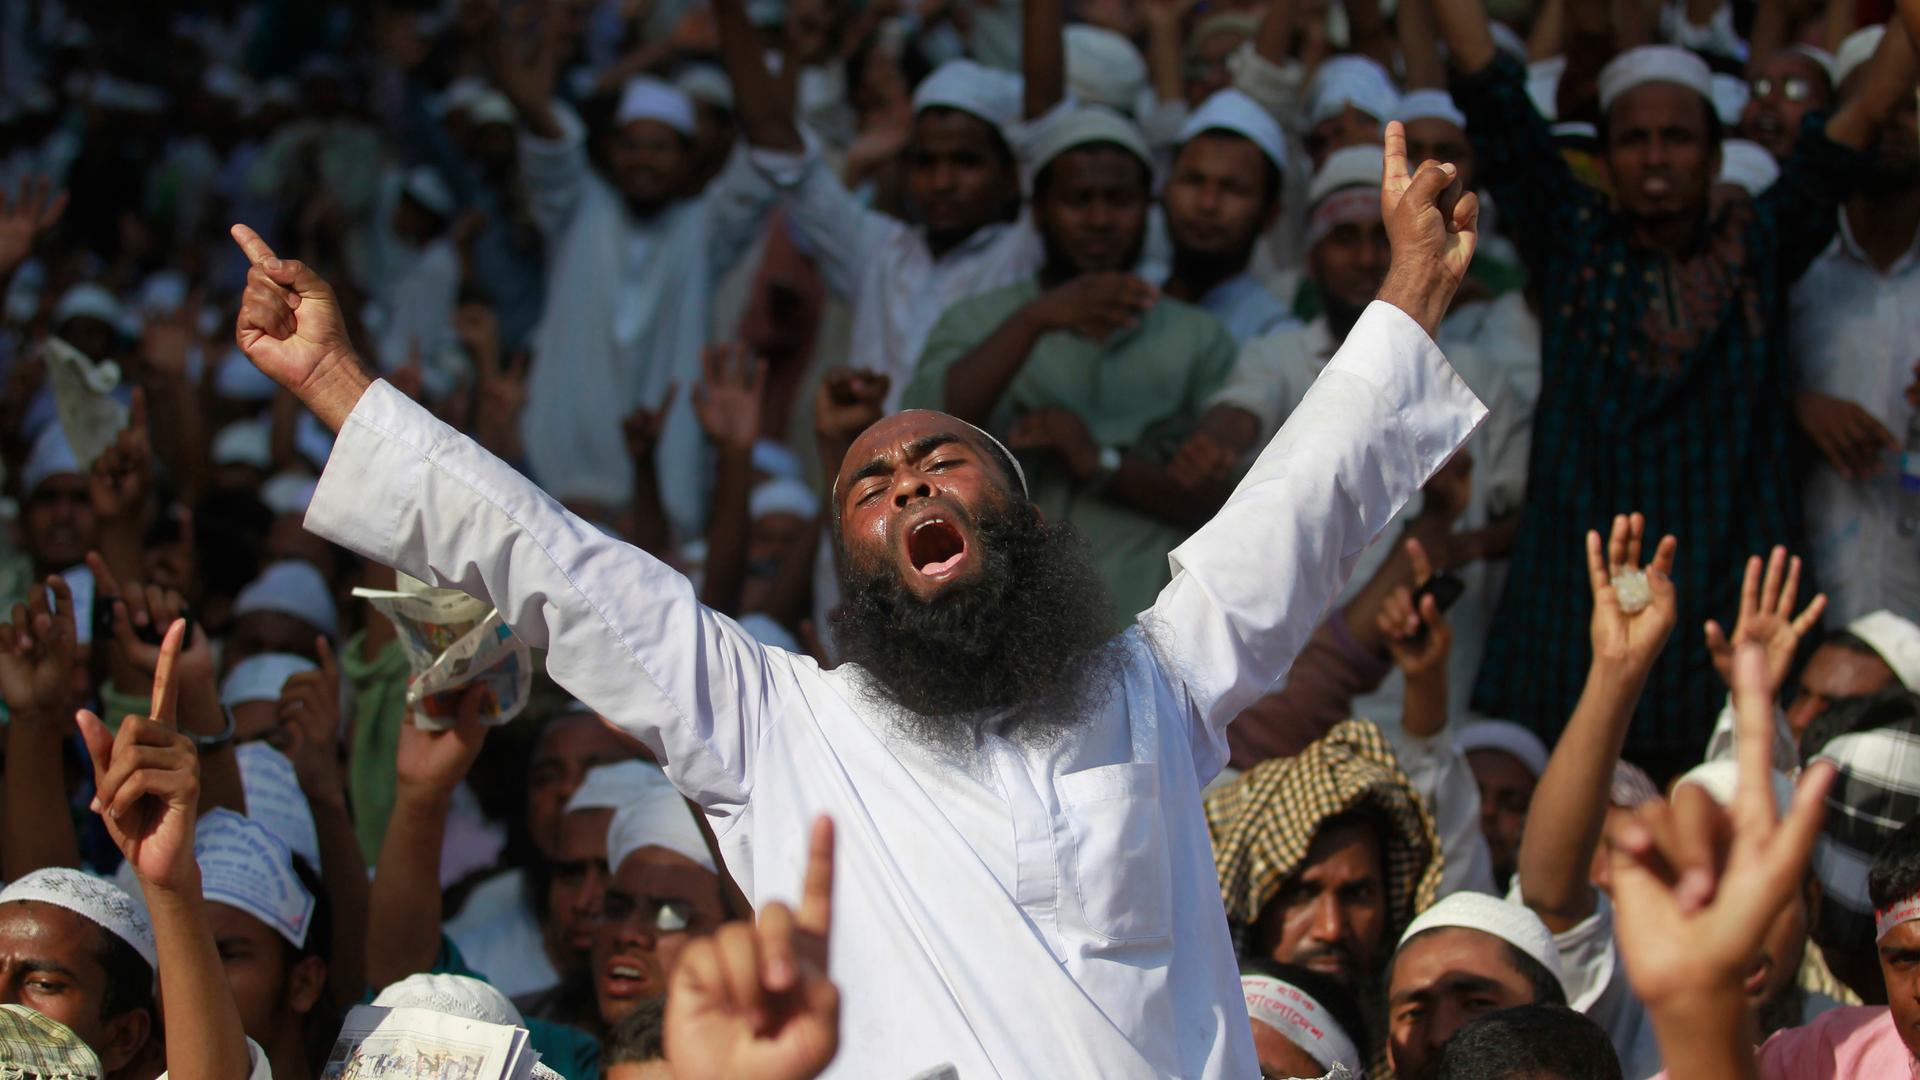 Activists from Hefajat-e-Islam, a Bangladeshi fundamentalist Muslim group that calls for the executions of atheist bloggers in the country, shout slogans during a 2013 rally.